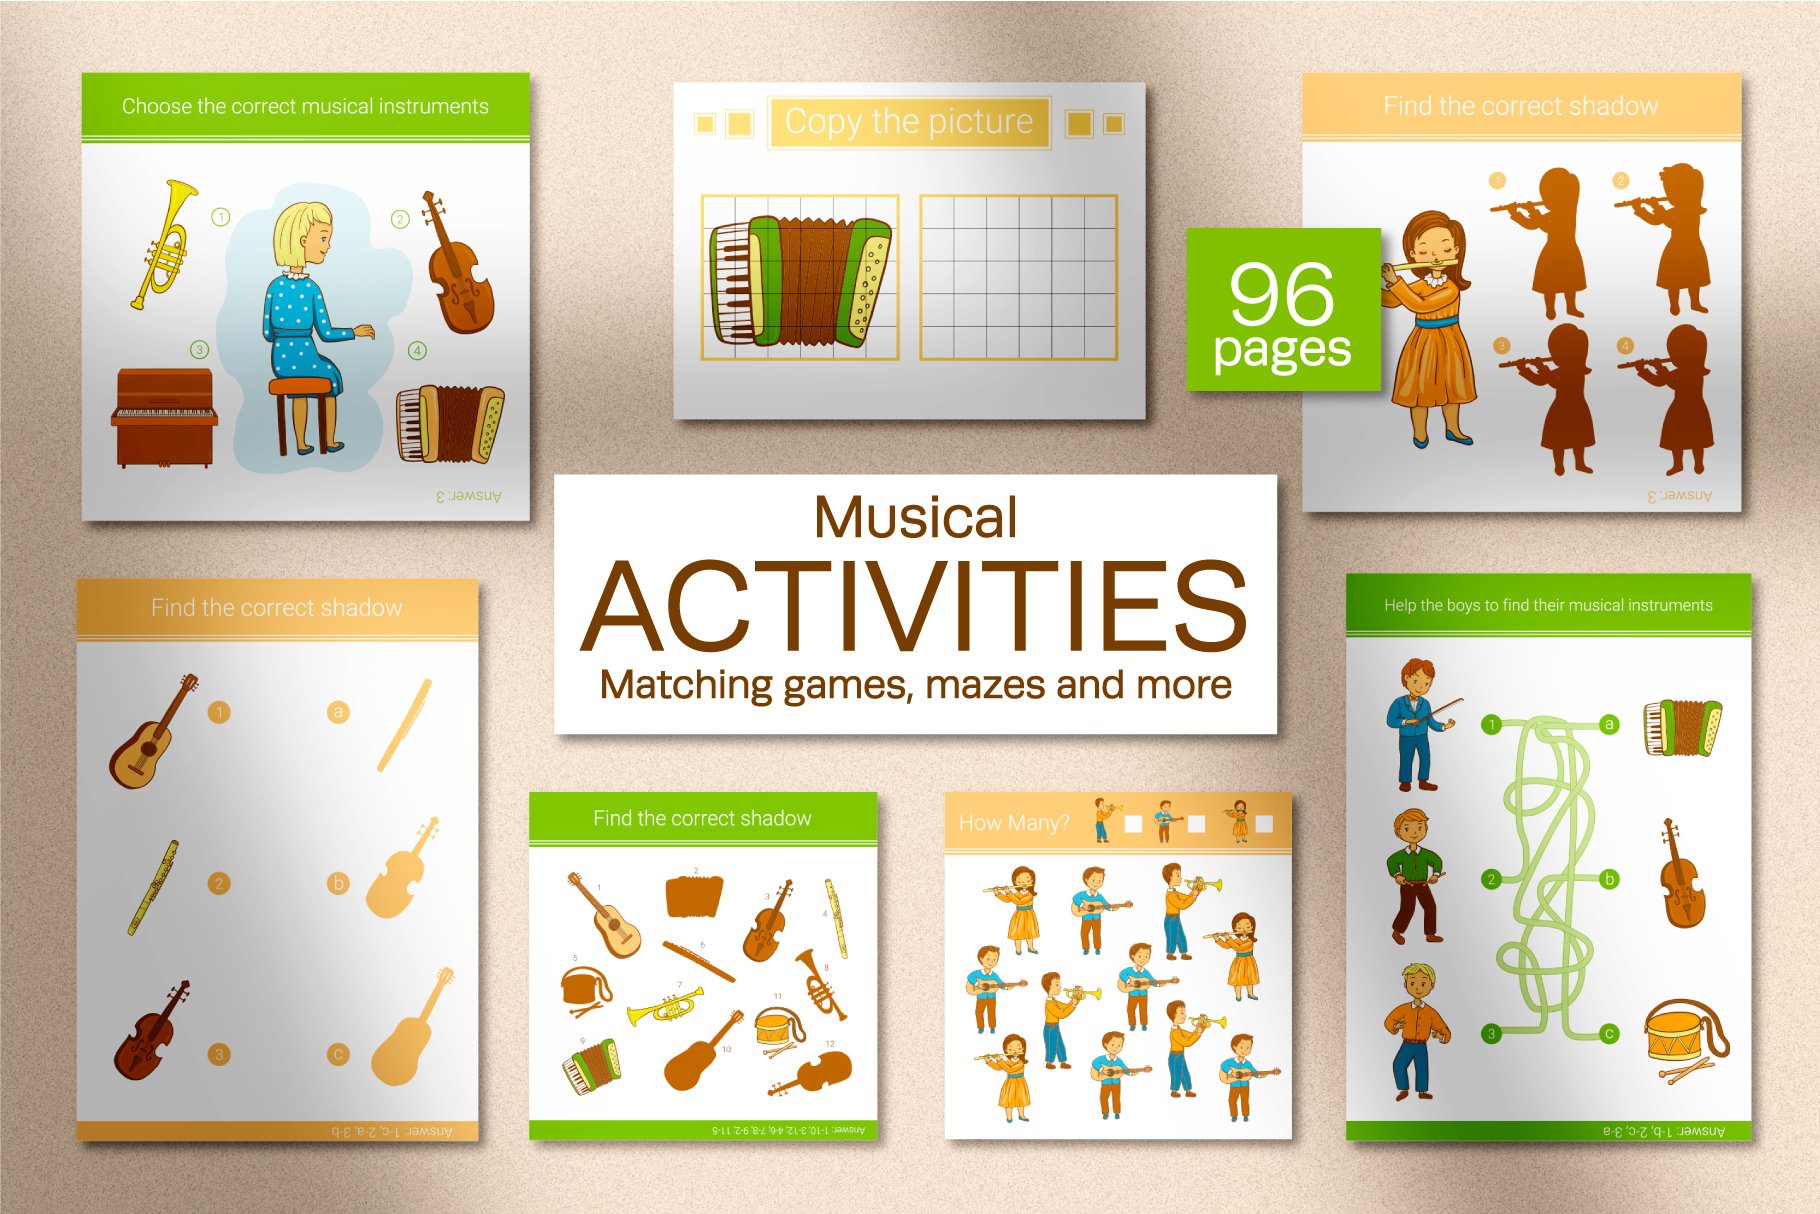 Musical Instruments Kids Activities cover image.